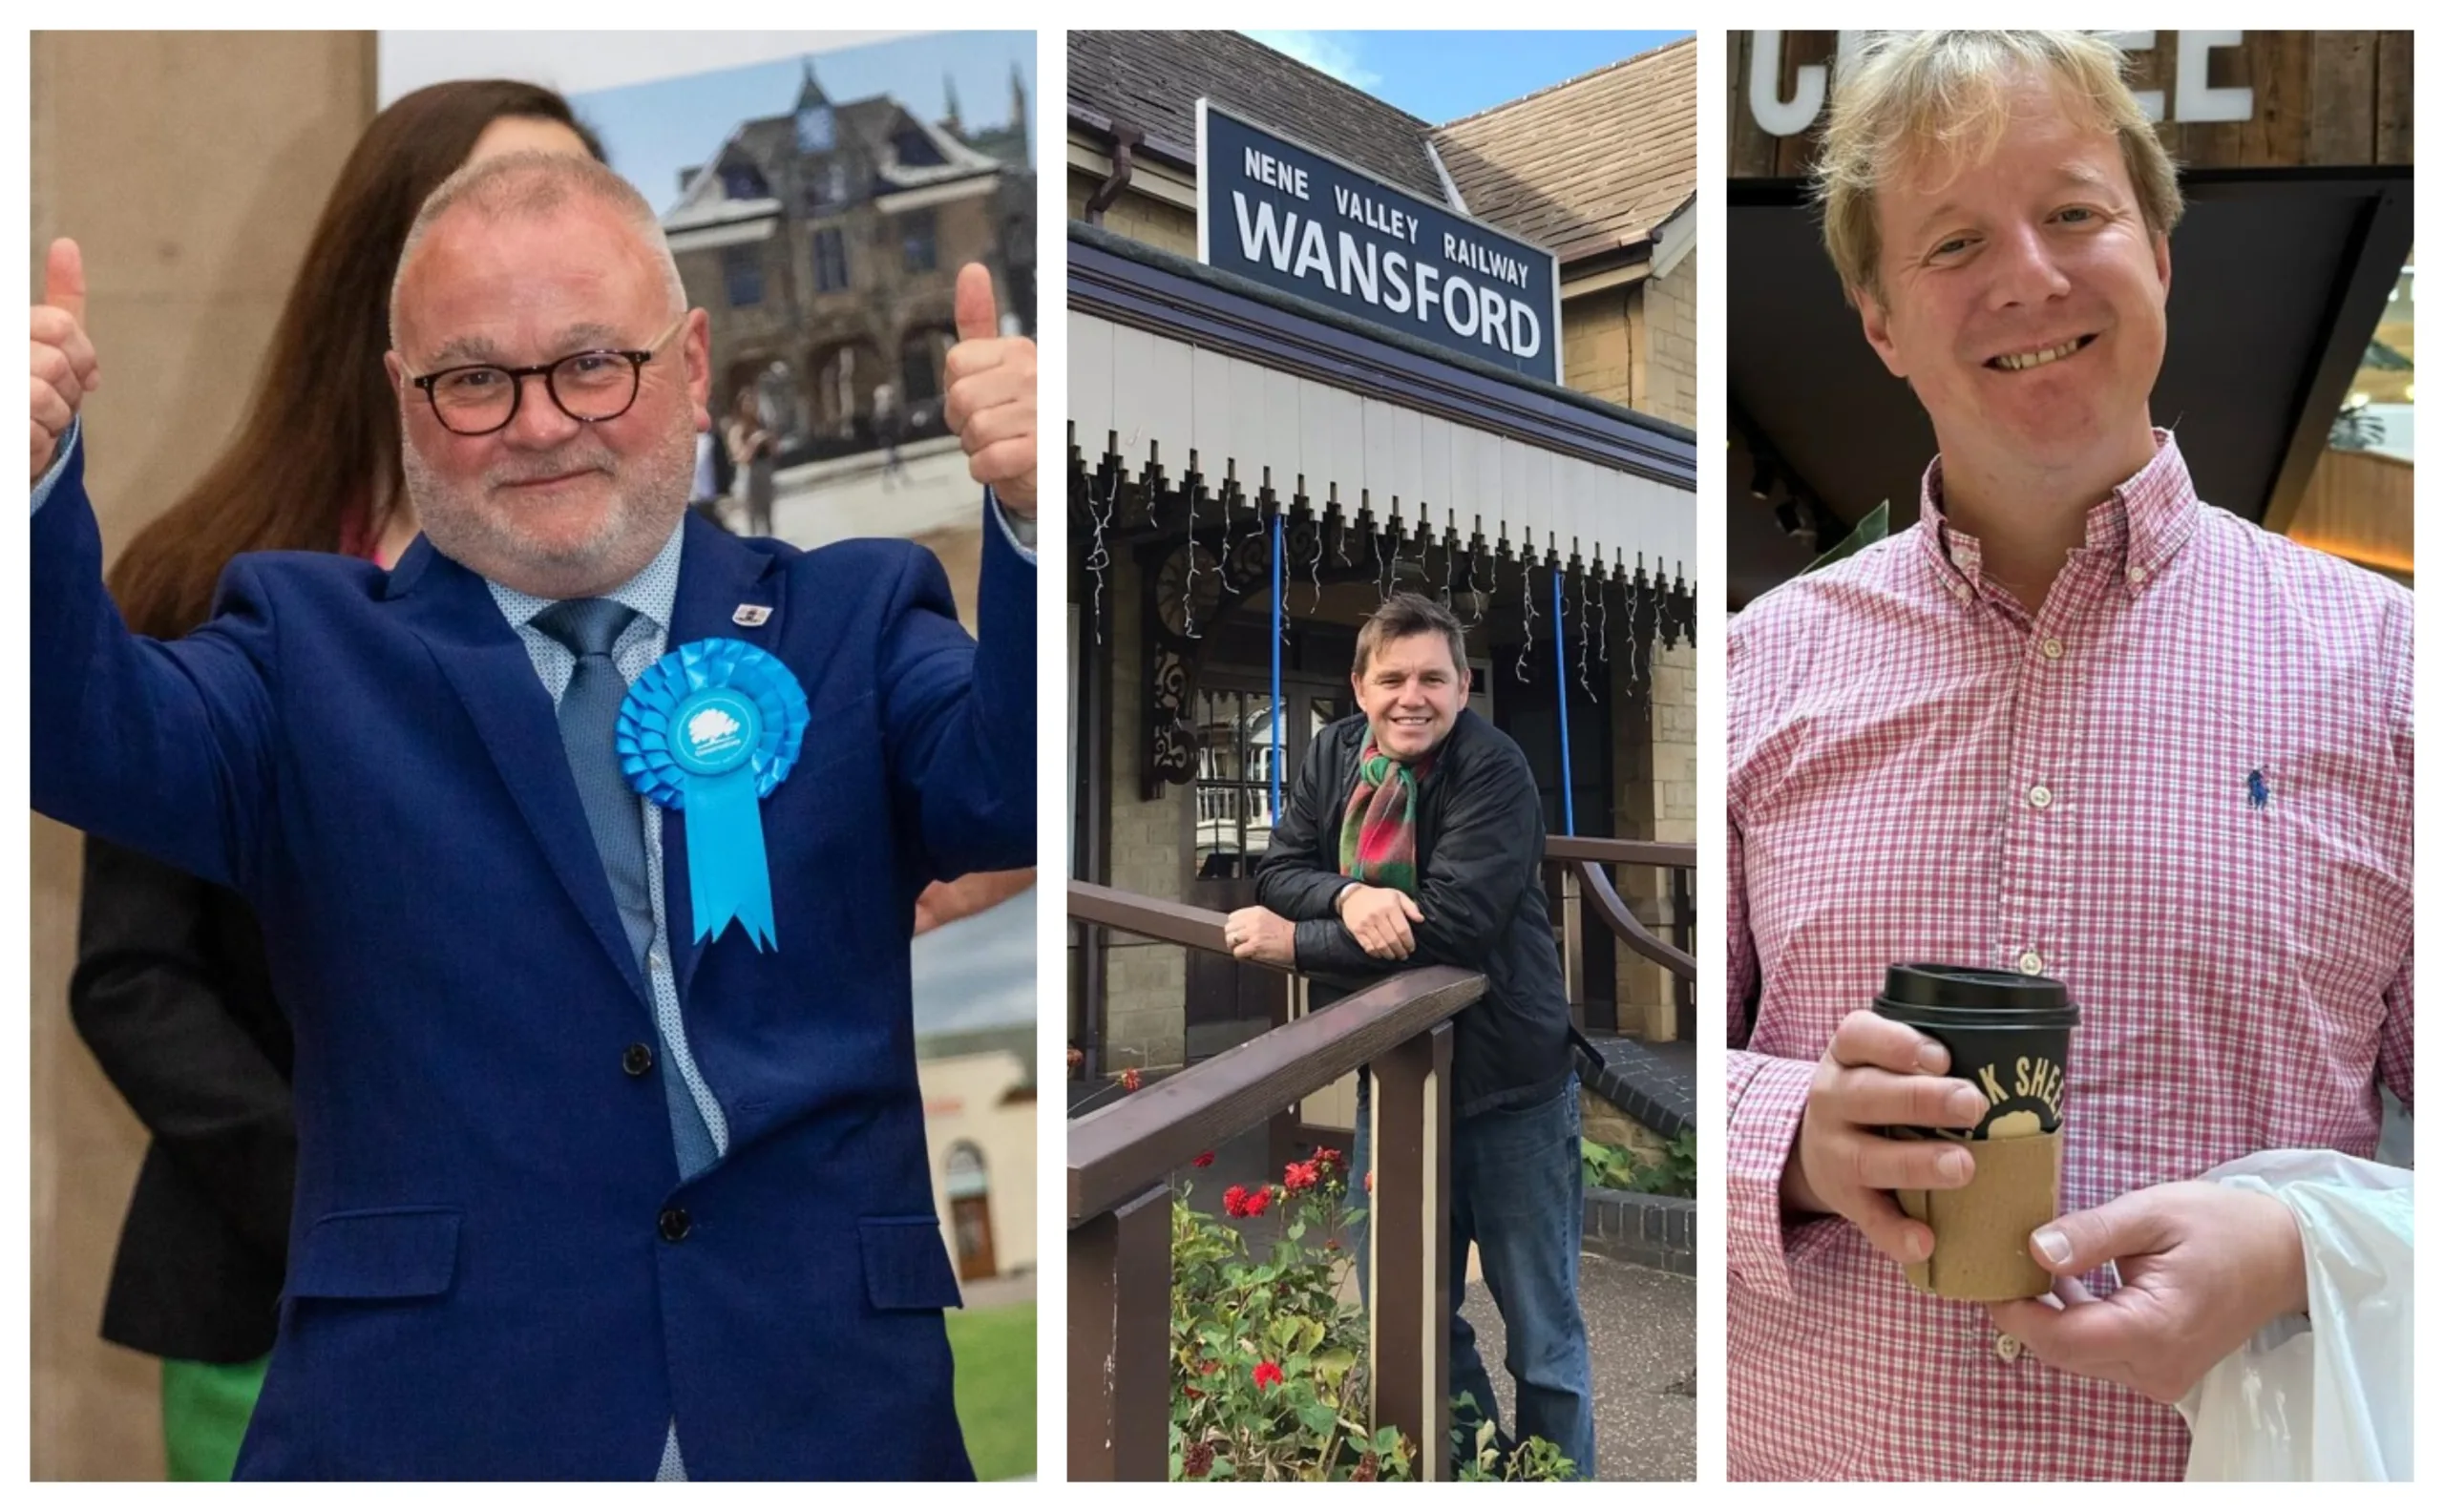 MP Paul Bristow (right) launched a vitriolic and at times personal and offensive attack on Mayor Dr Nik Johnson (centre) – co signed by Peterborough City Council leader Cllr Wayne Fitzgerald (left) and sent on official House of Commons